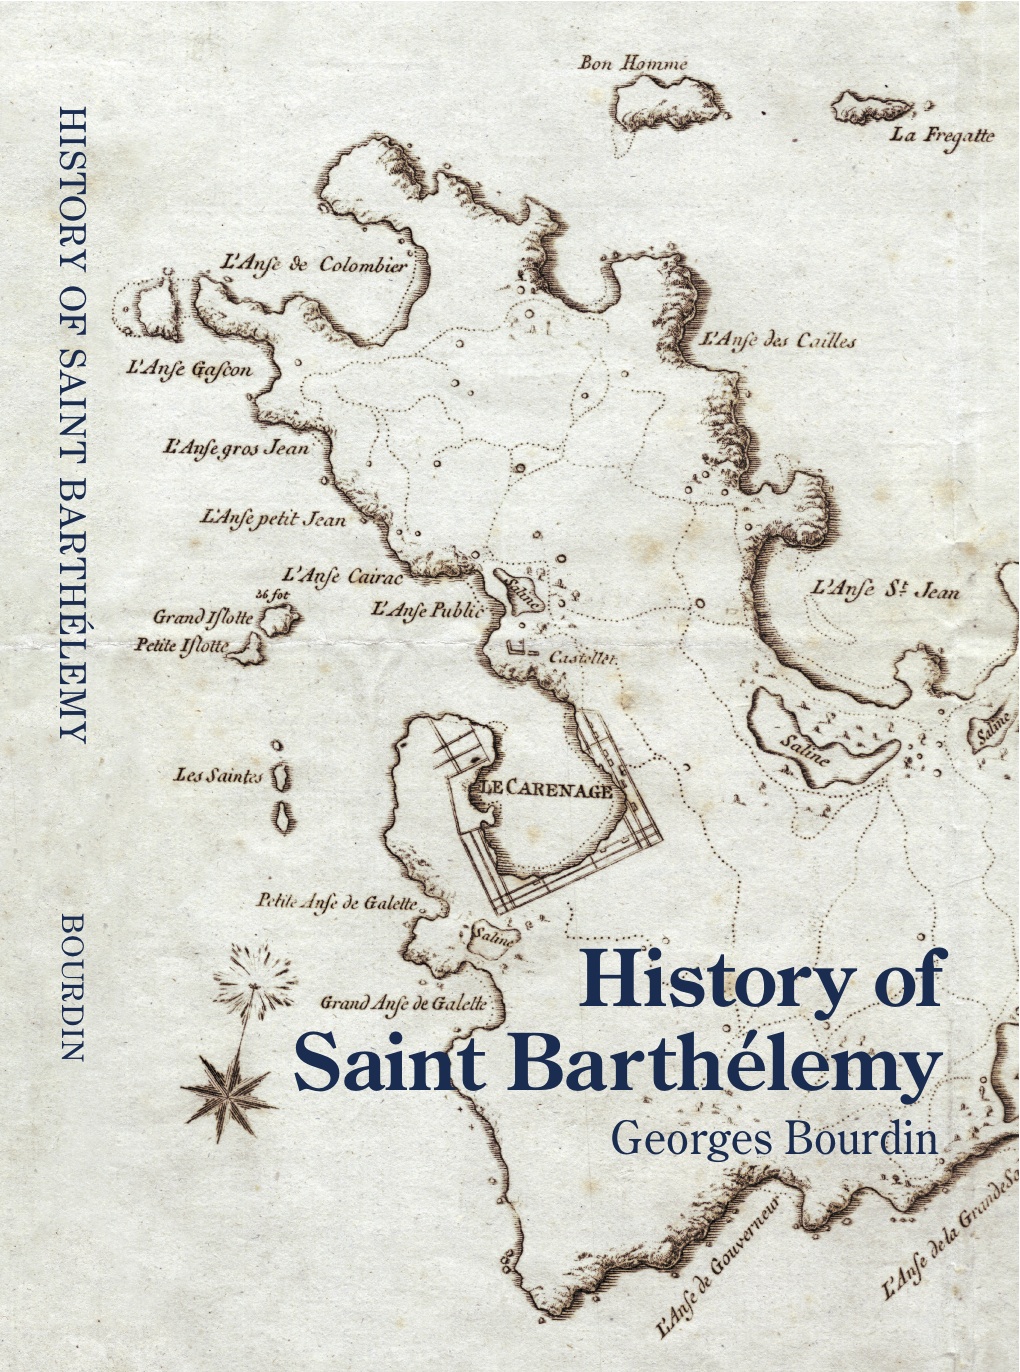 WANT TO KNOW MORE ABOUT ST BARTH HISTORY ? Buy Georges Bourdin’s book!